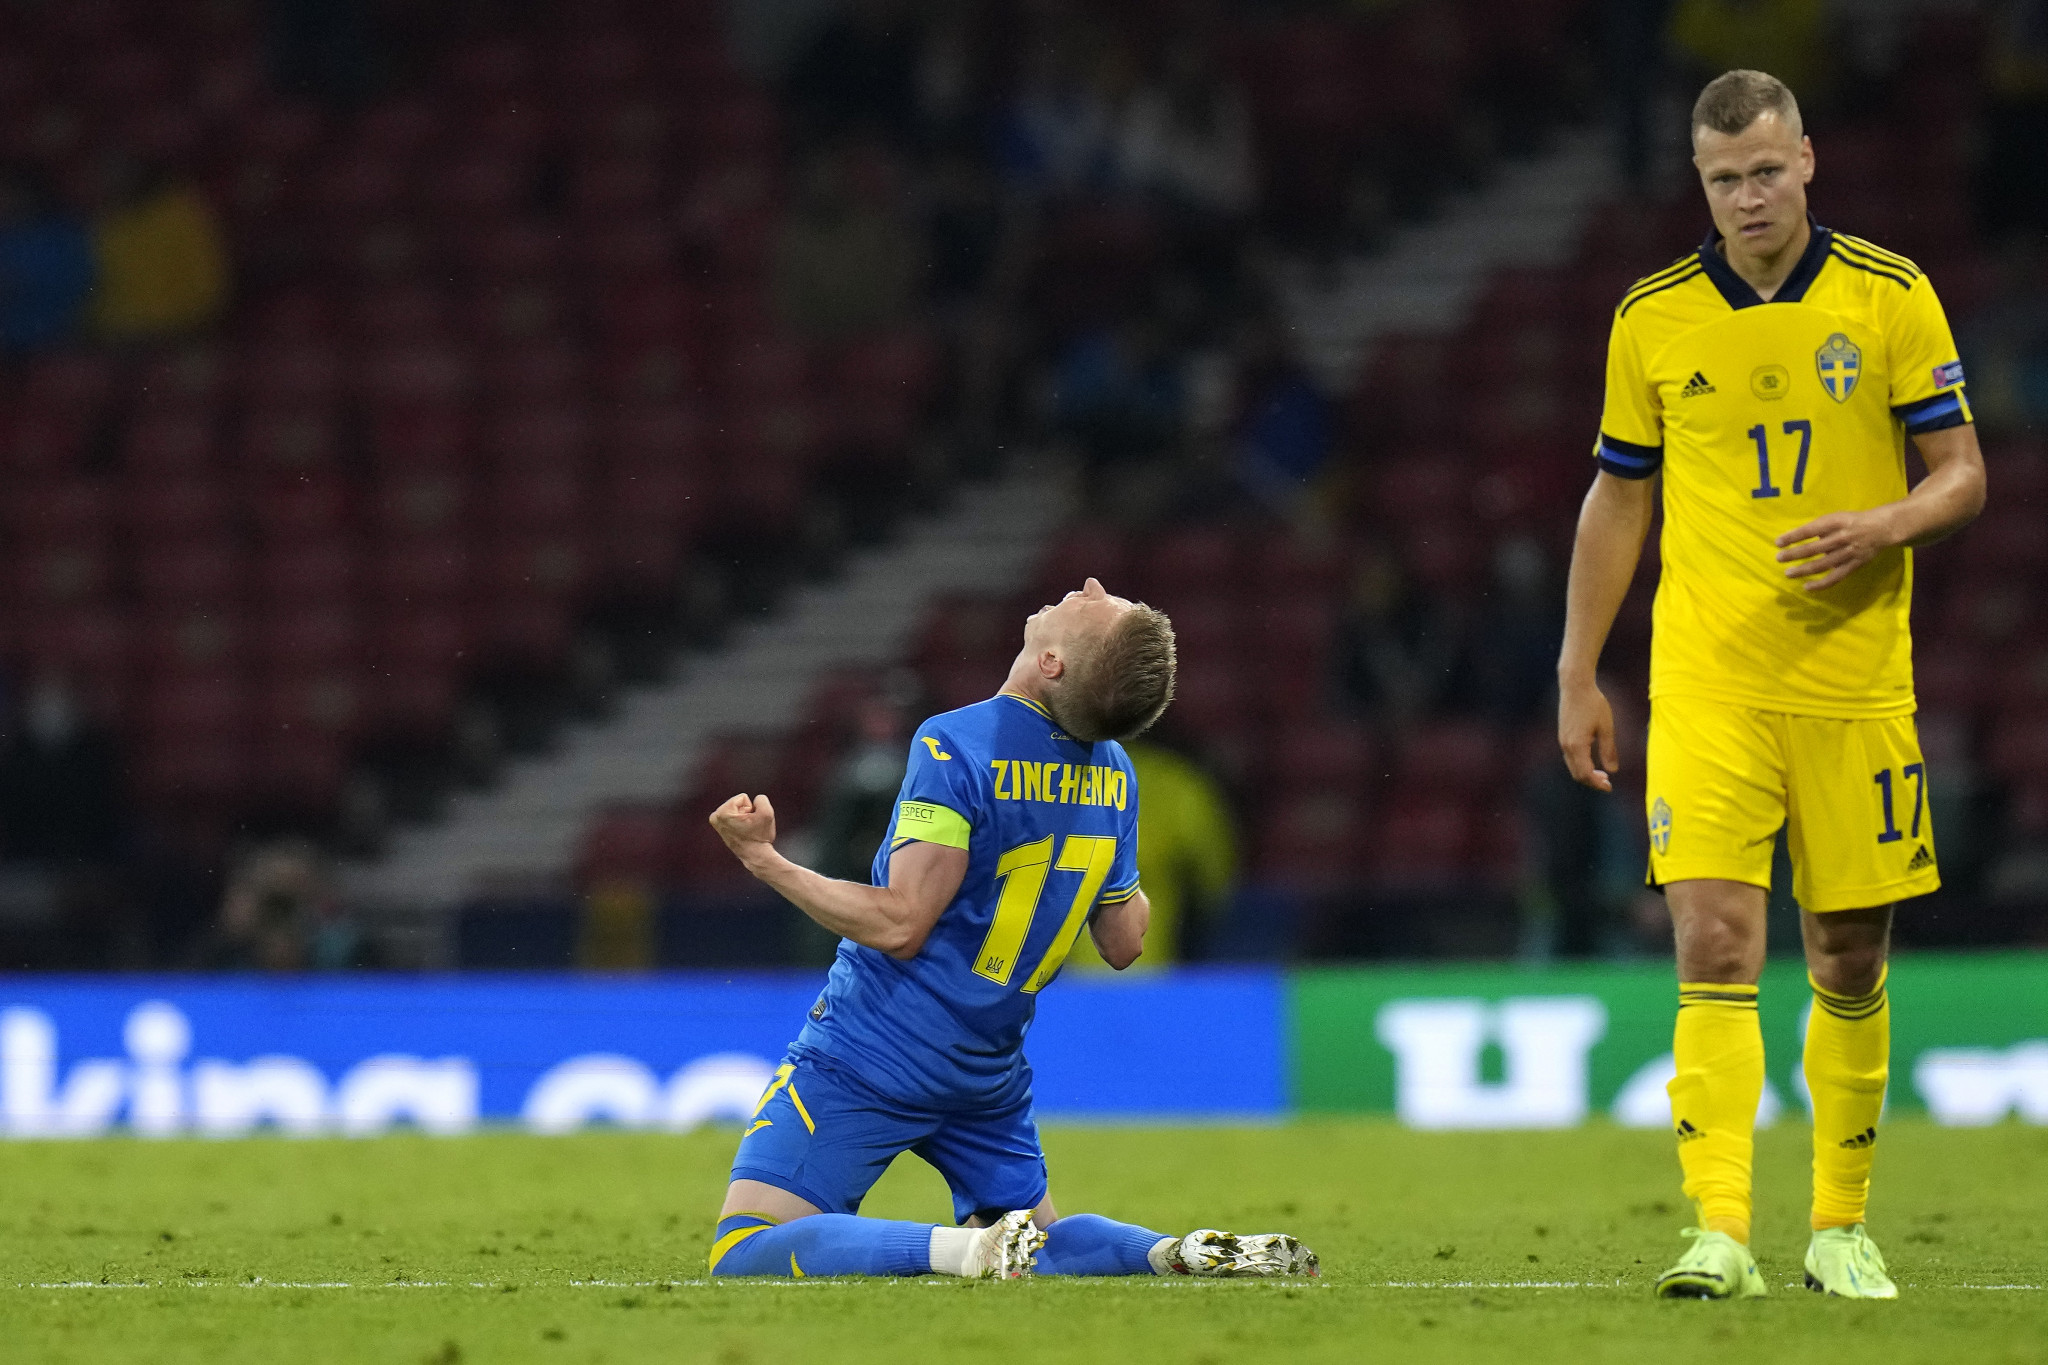 Oleksandr Zinchenko scored one goal and created another as Ukraine reached the quarter-finals of the European Championship for the first time ©Getty Images